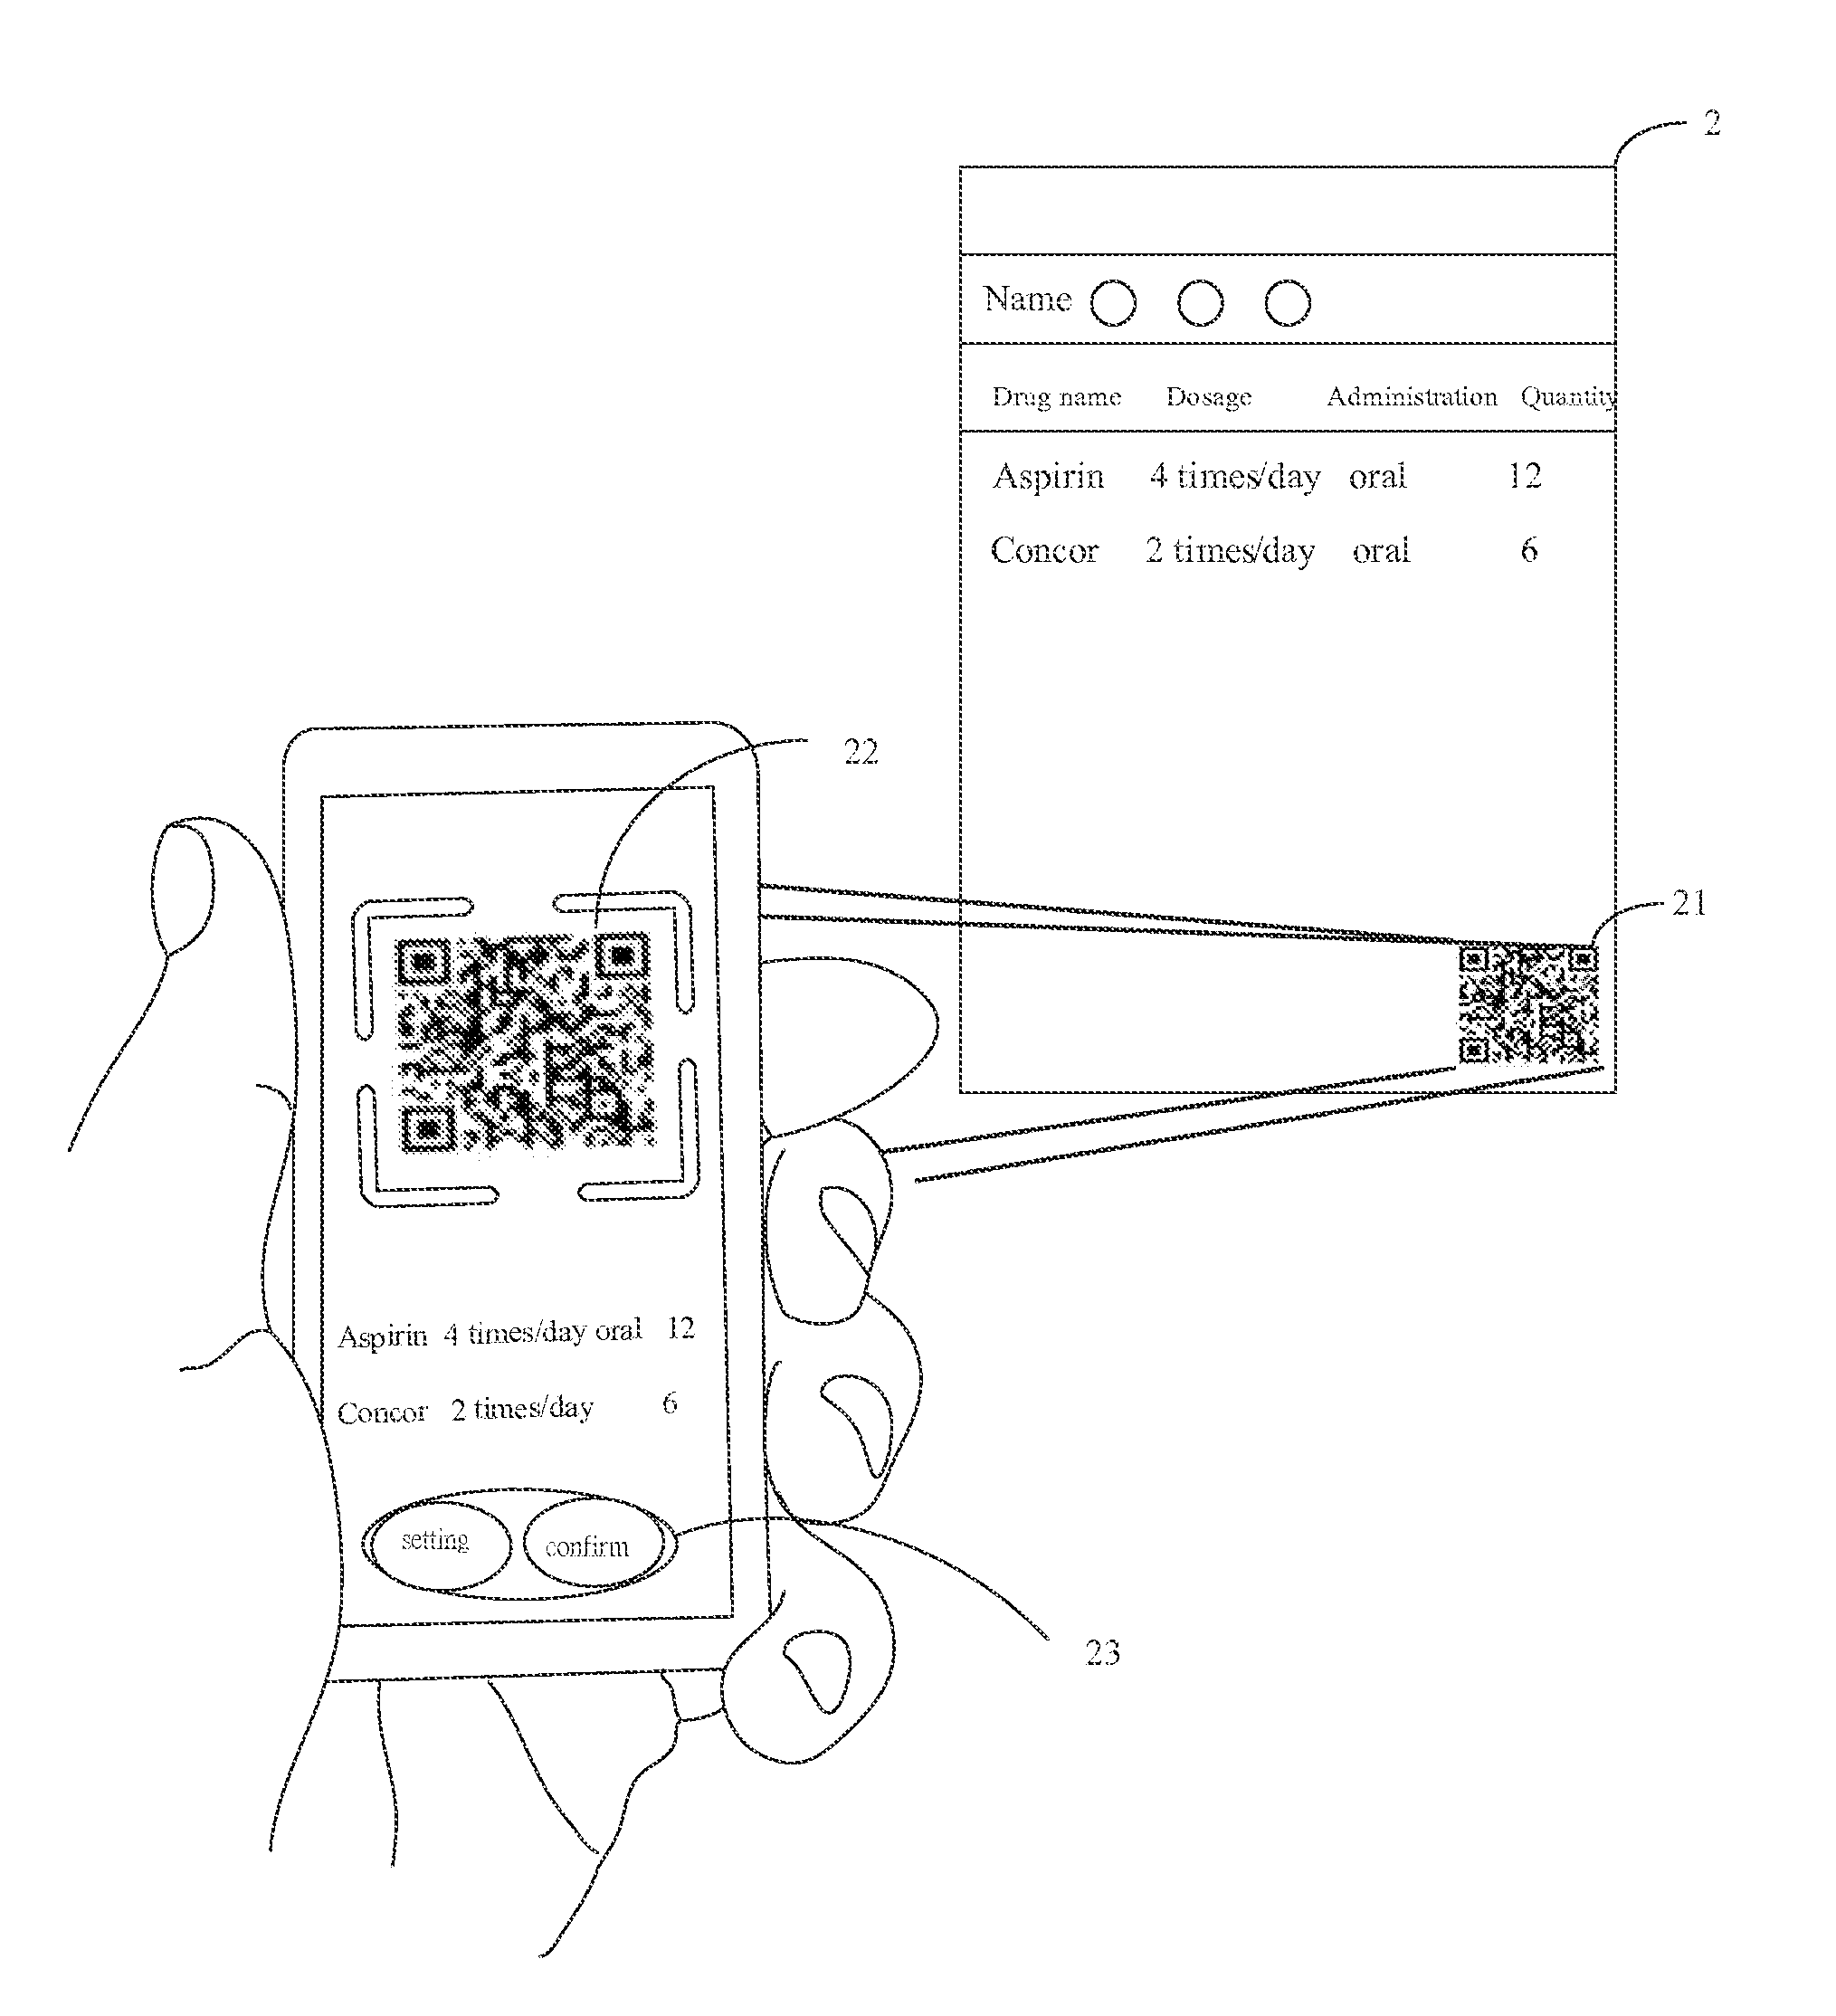 Assistance device for medication compliance